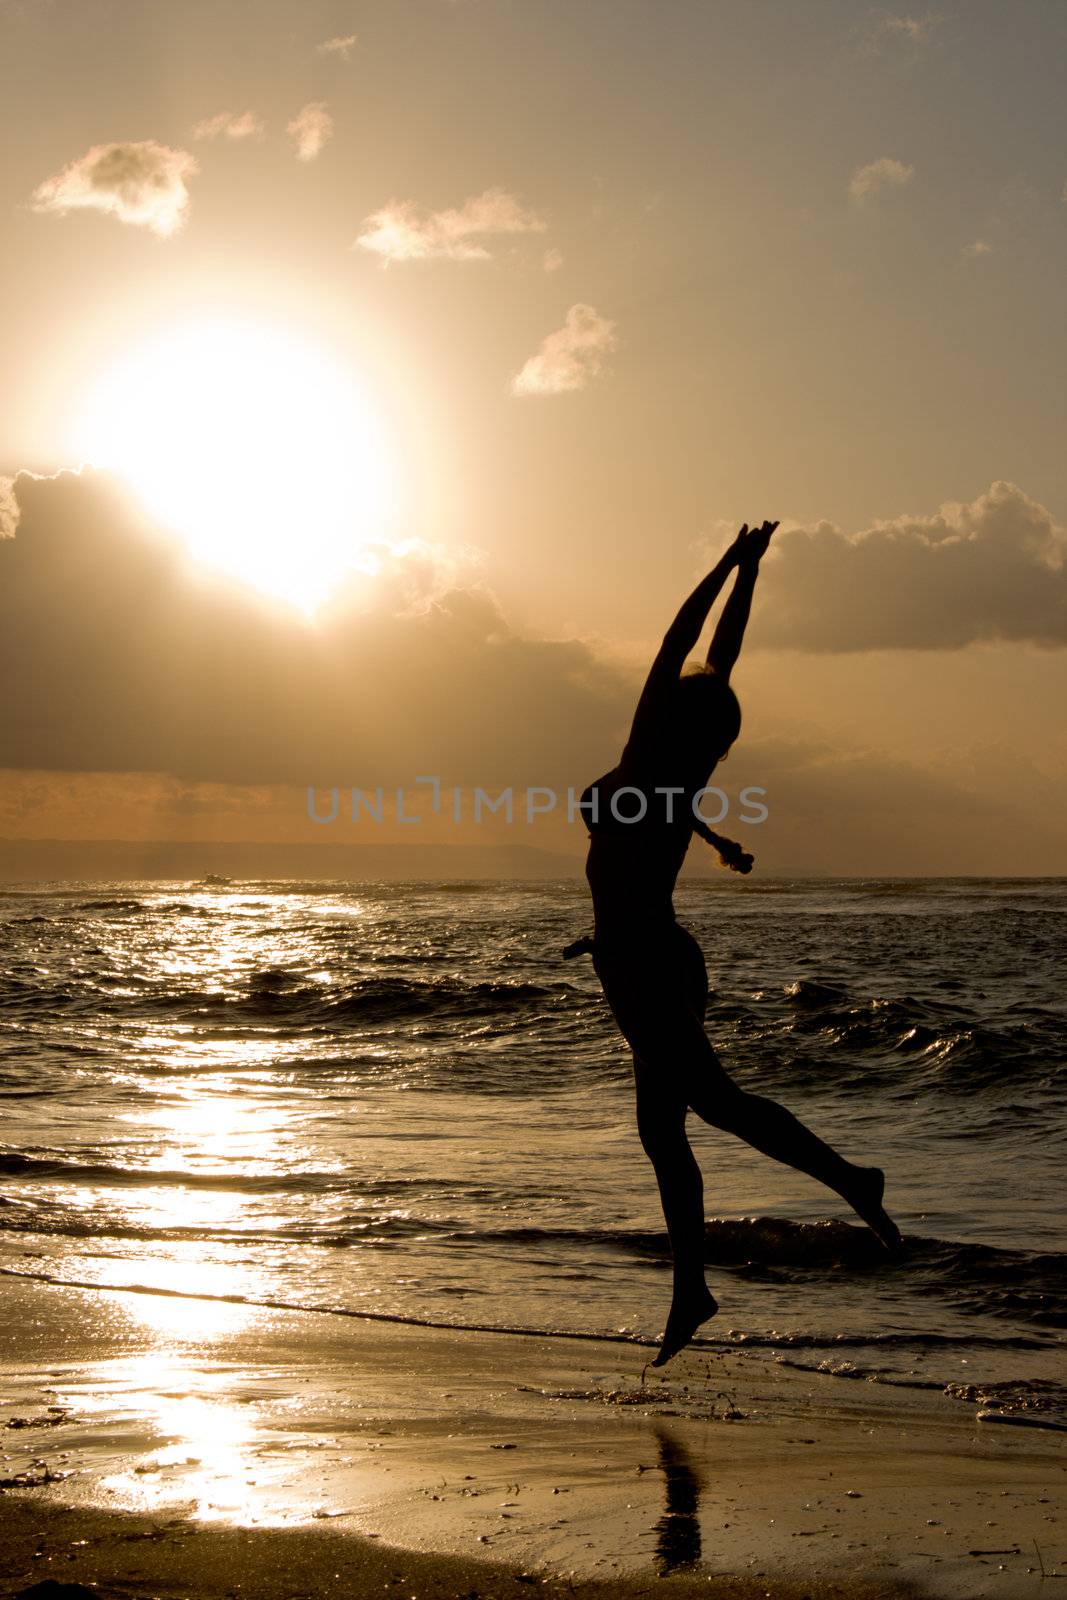 Girl jumping on sunrise at the beach by dimol